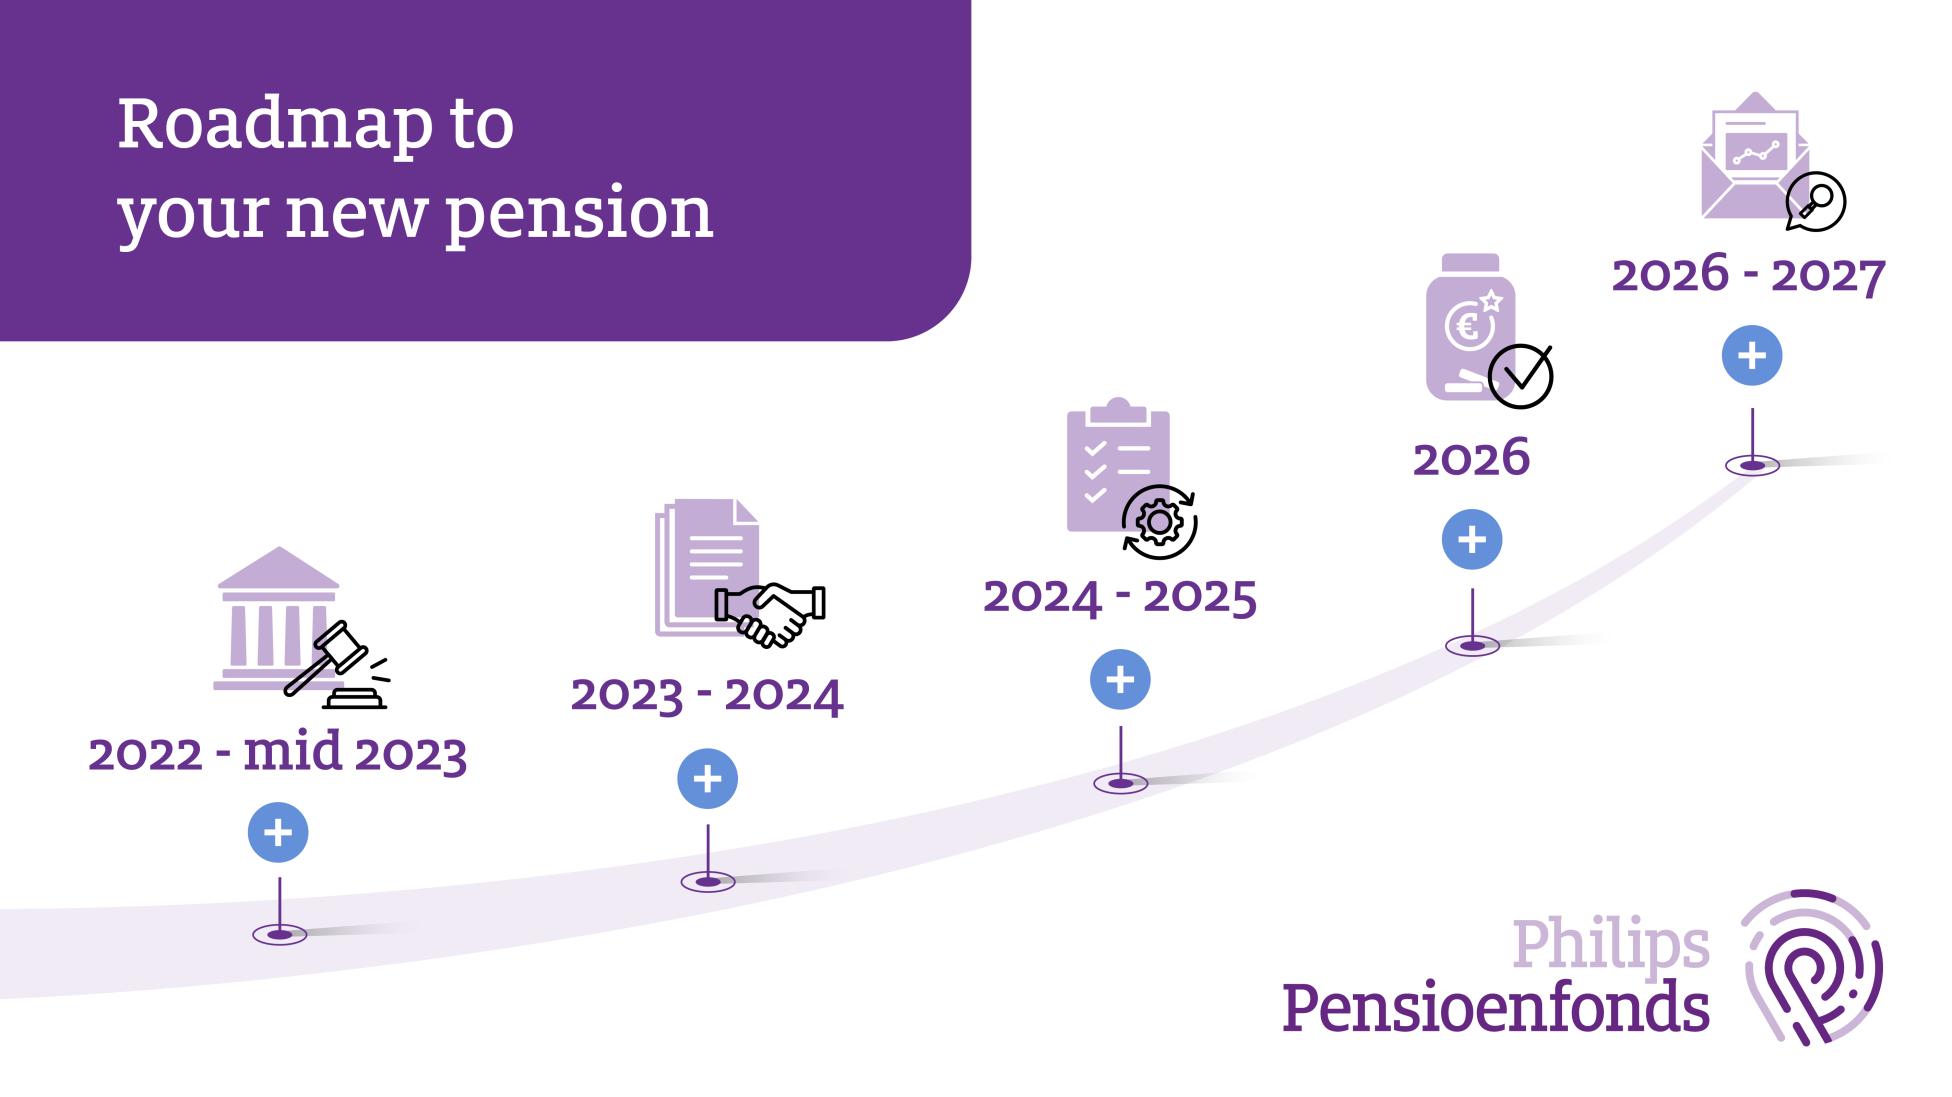 Roadmap to your new pension